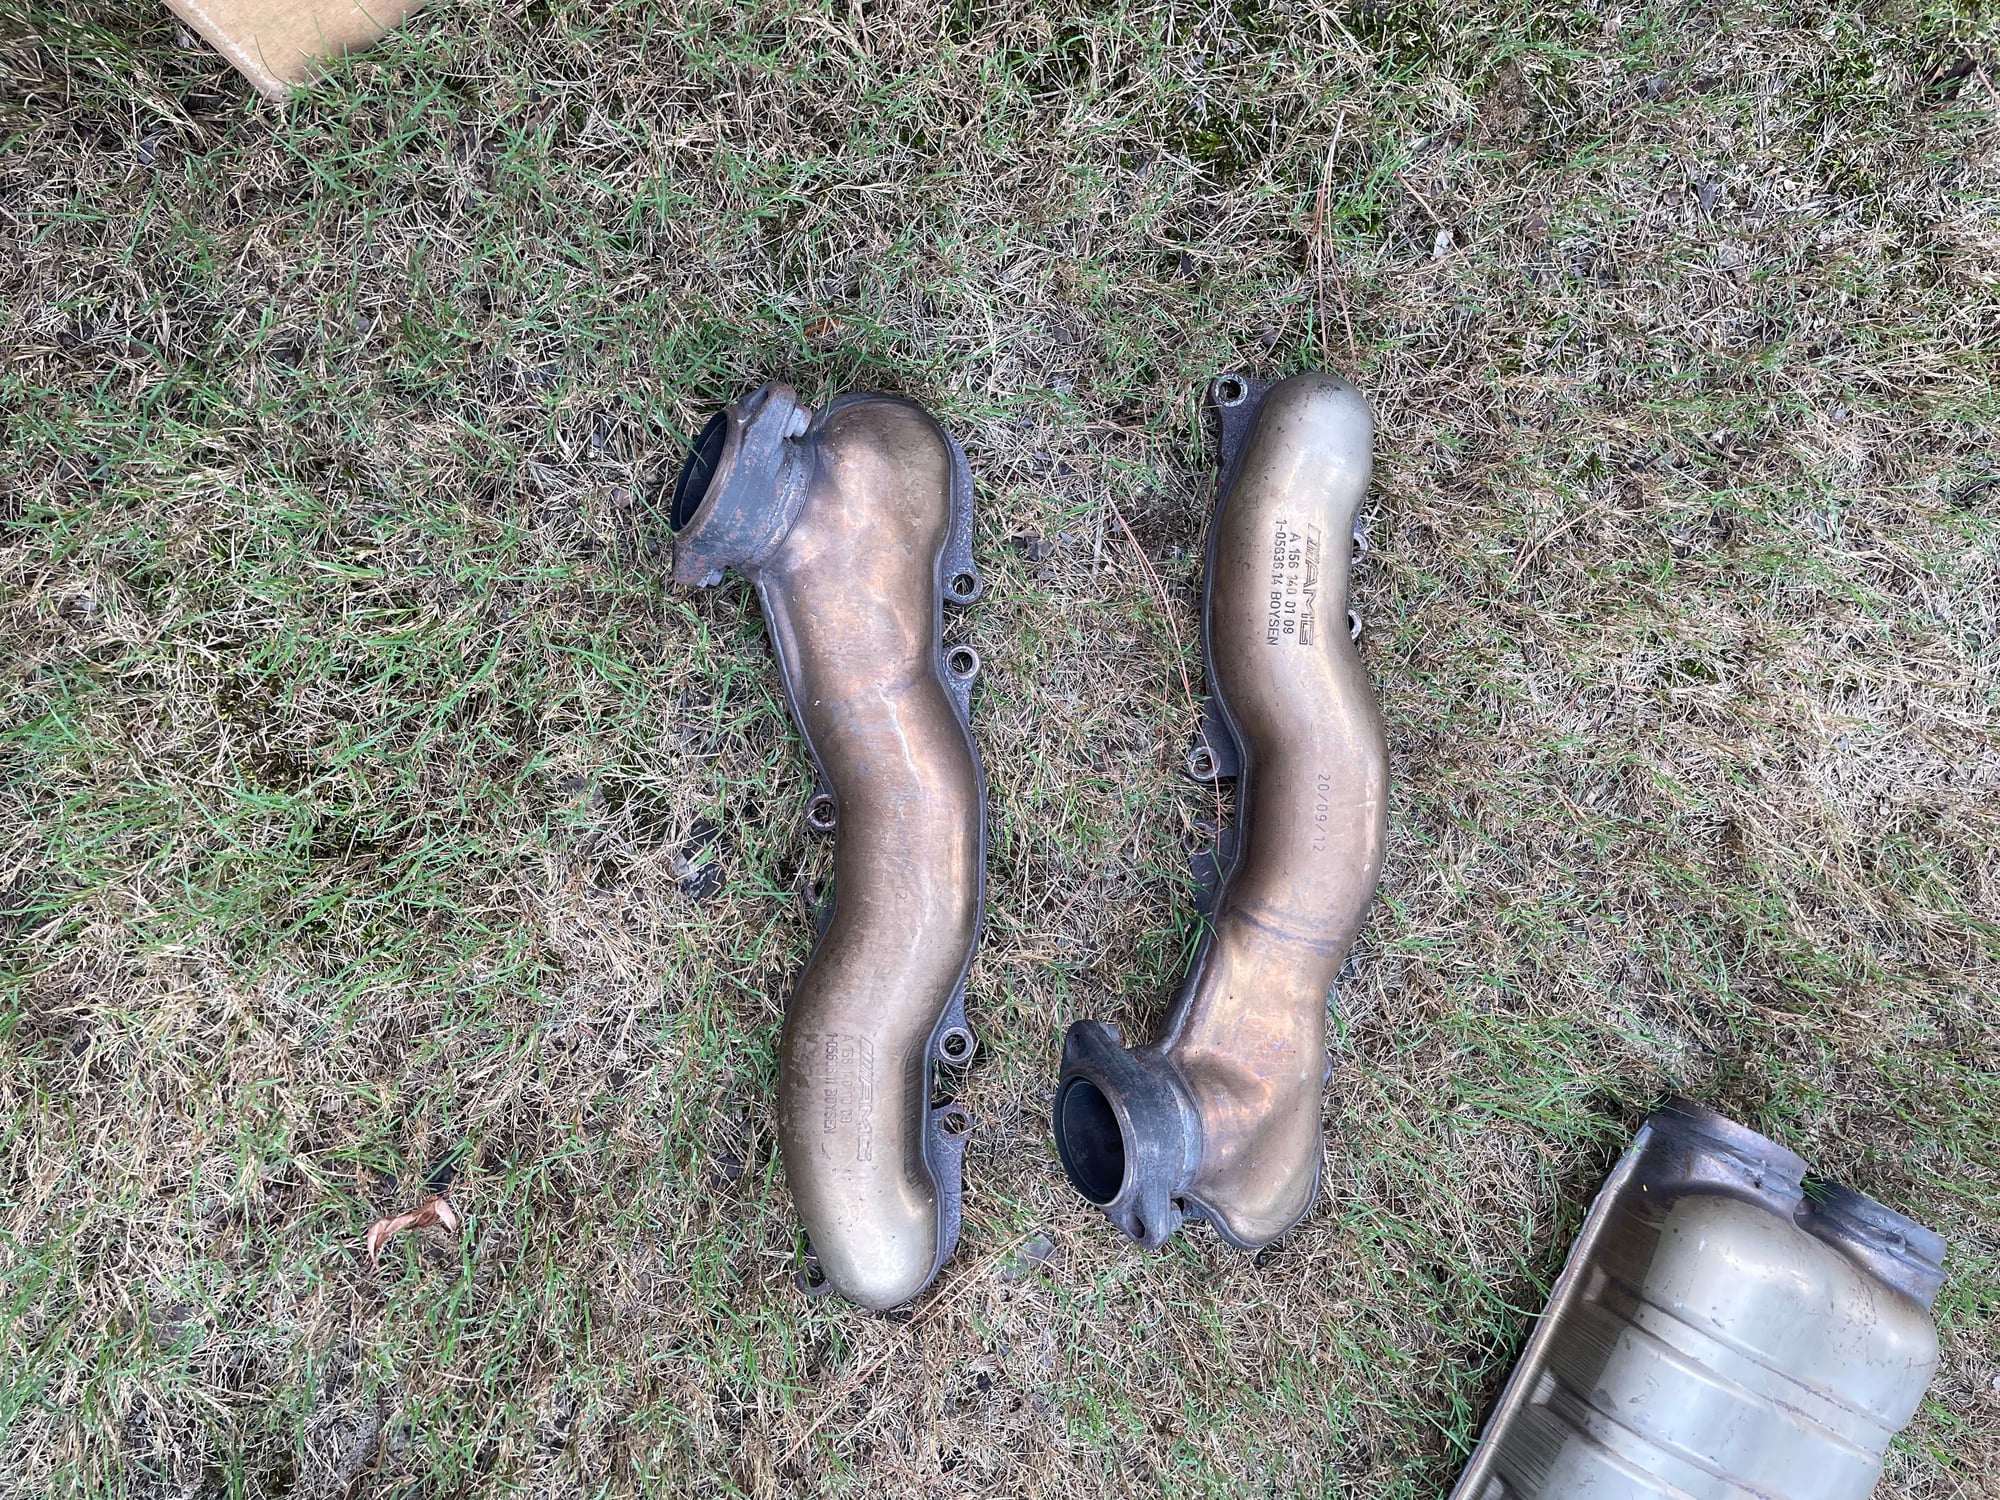 Engine - Exhaust - 2013 C63 AMG OEM Exhaust (manifolds, catalytic converters, resonator) - Used - 2009 to 2014 Mercedes-Benz C63 AMG - Raleigh, NC 27616, United States